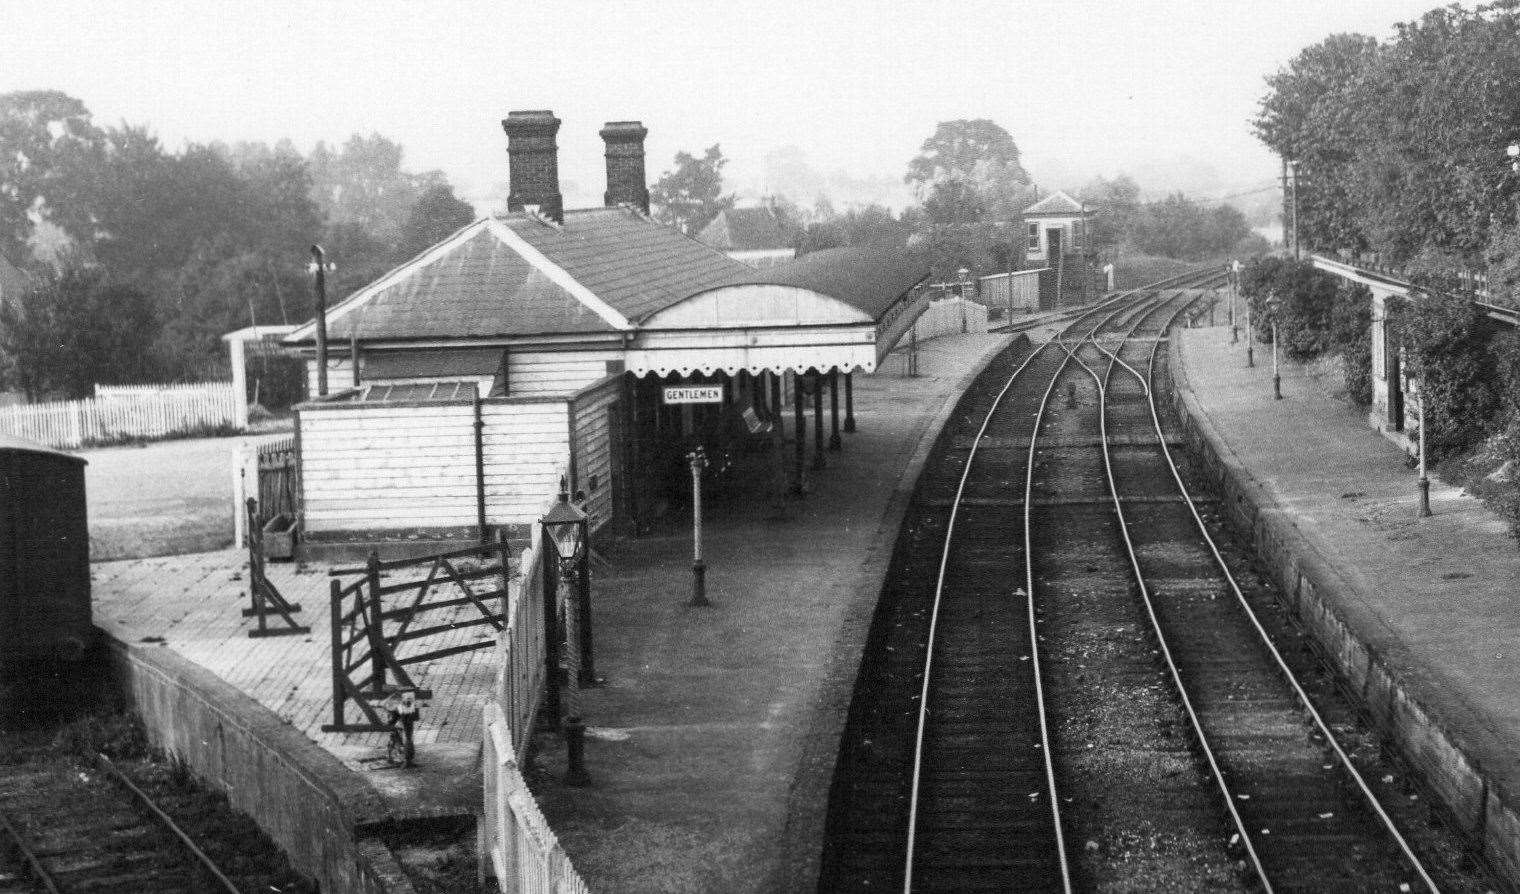 Lyminge station in the years when the trains ran through the valley. Picture: from the collection of Lyminge Historical Society